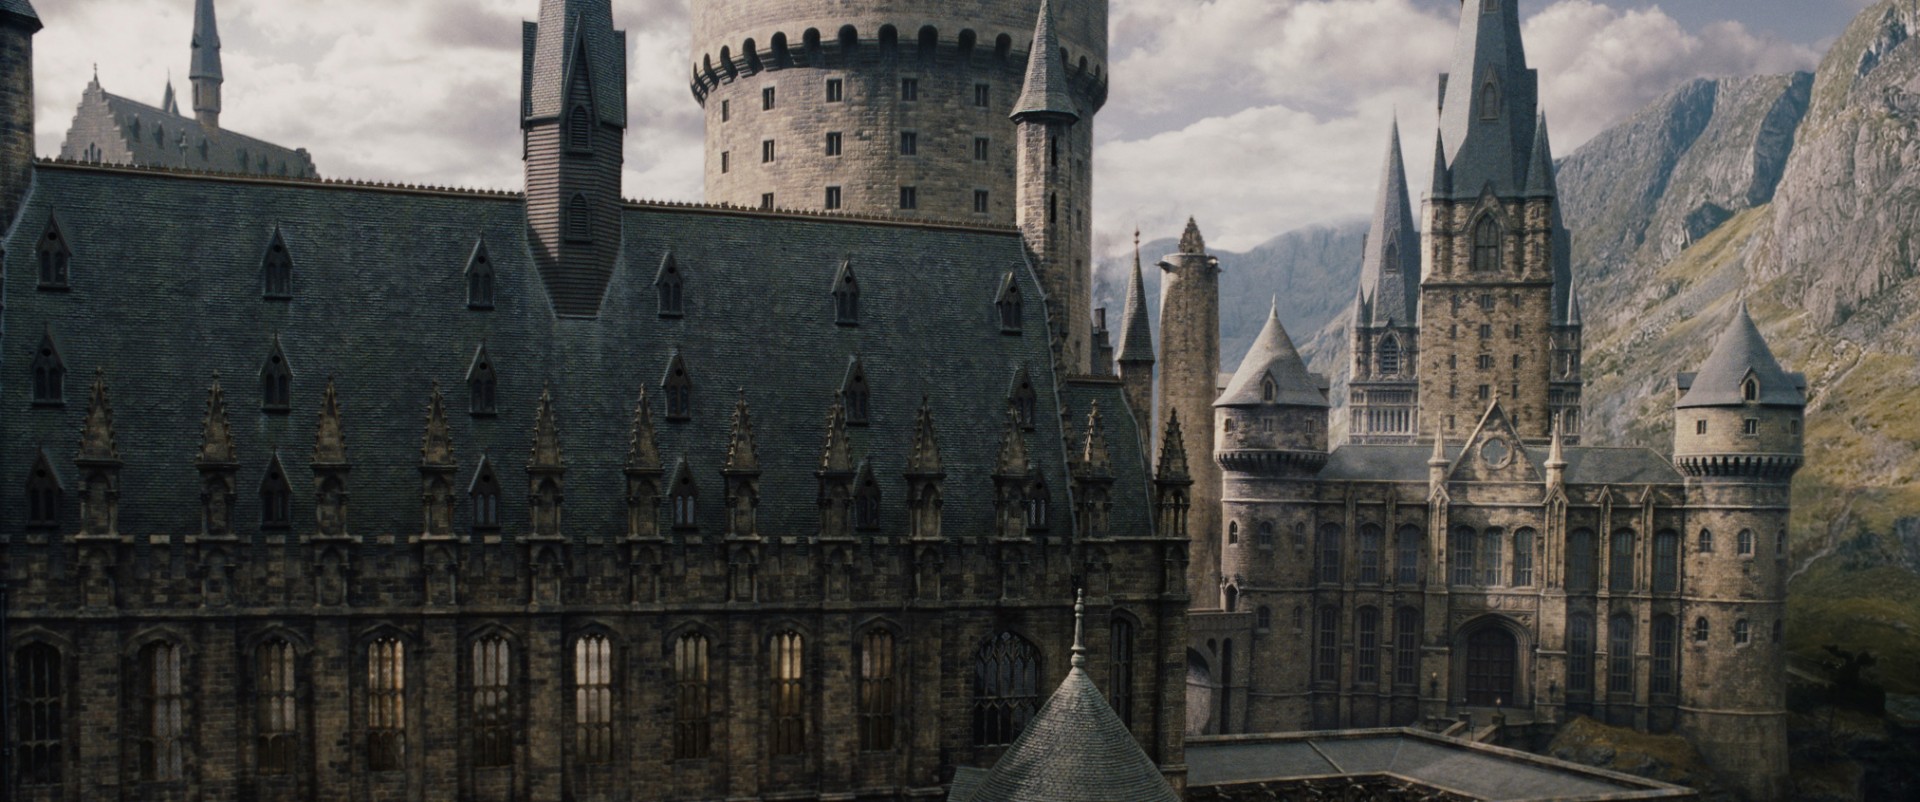 Hogwarts School Of Witchcraft And Wizardry Department Of